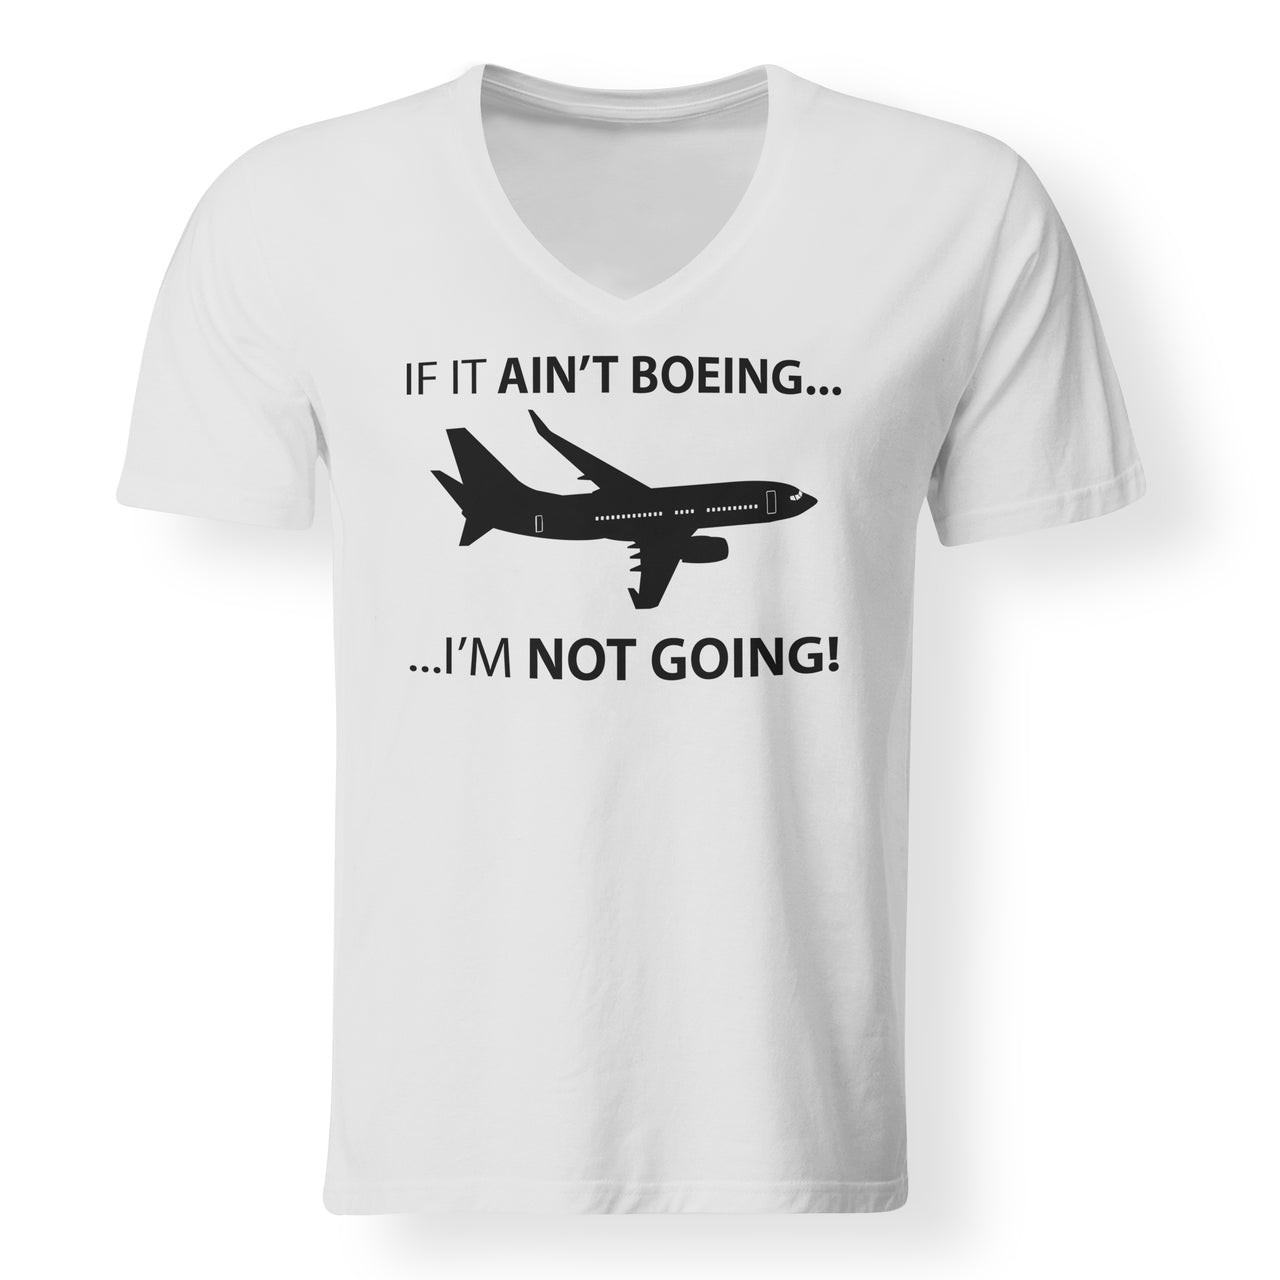 If It Ain't Boeing I'm Not Going! Designed V-Neck T-Shirts